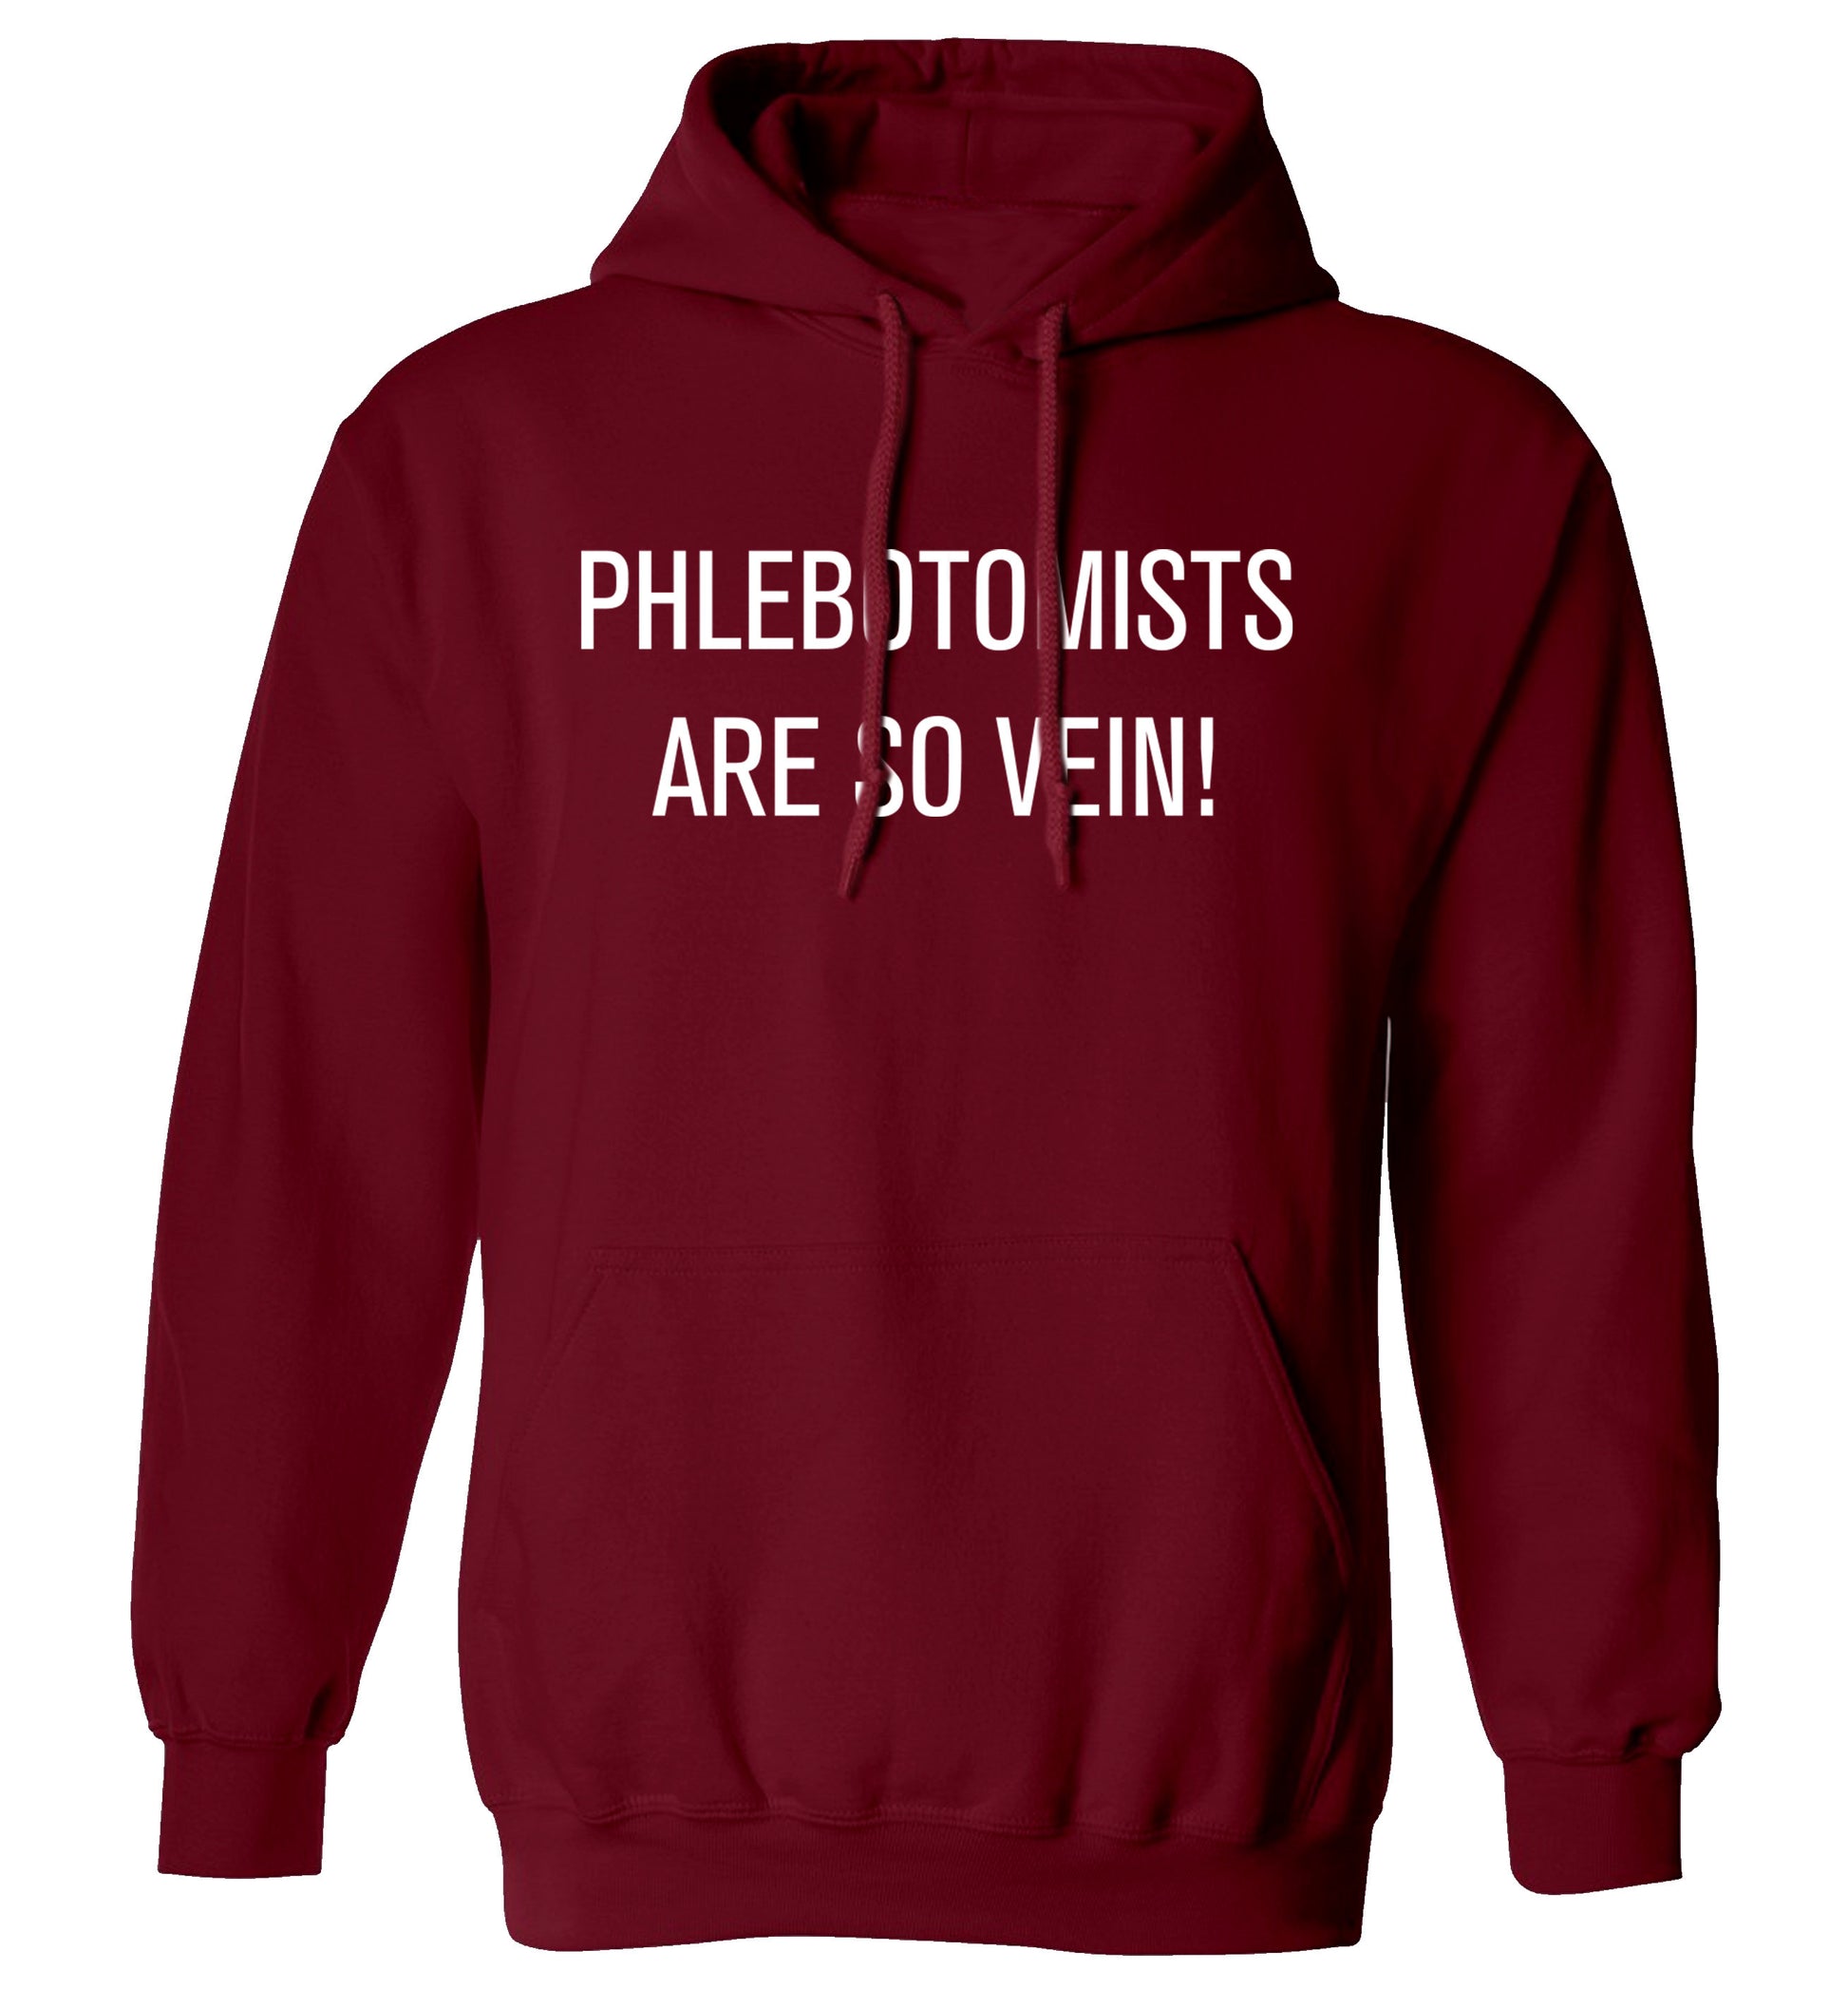 Phlebotomists are so vein! adults unisex maroon hoodie 2XL